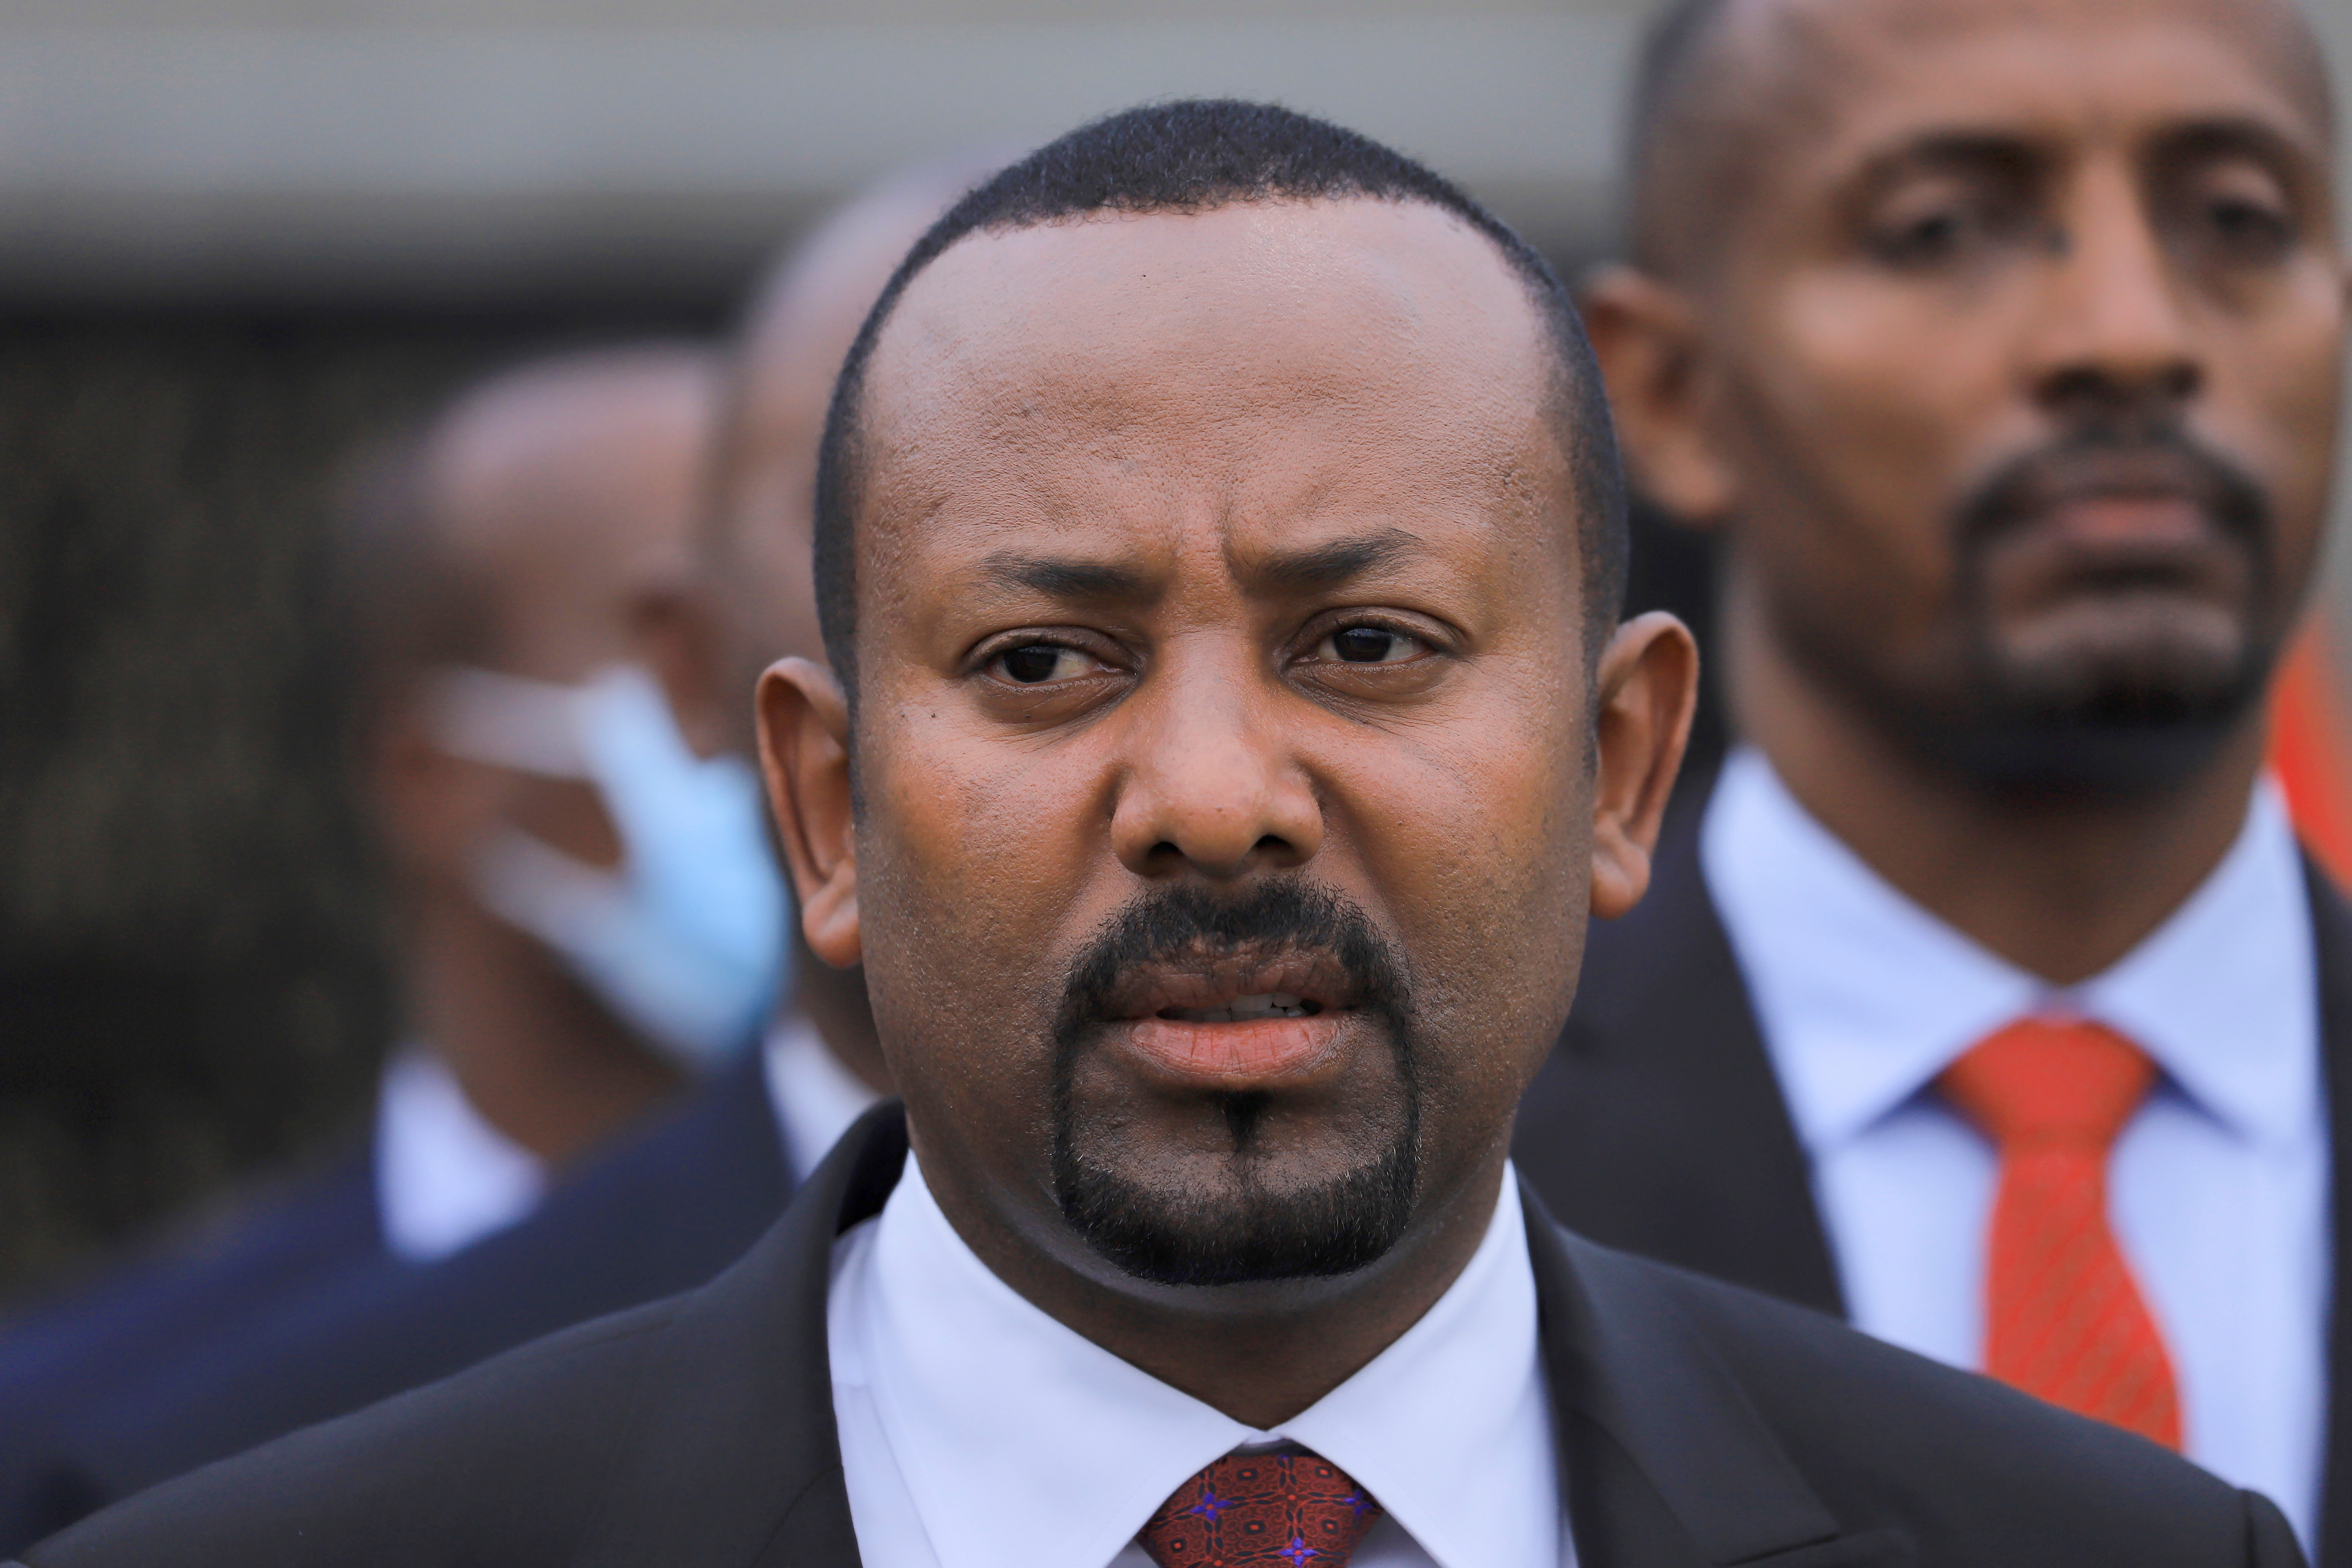 Ethiopian Prime Minister Abiy Ahmed arrives for the inauguration ceremony of the Meskel square, marking the last election rally he will hold in Addis Ababa